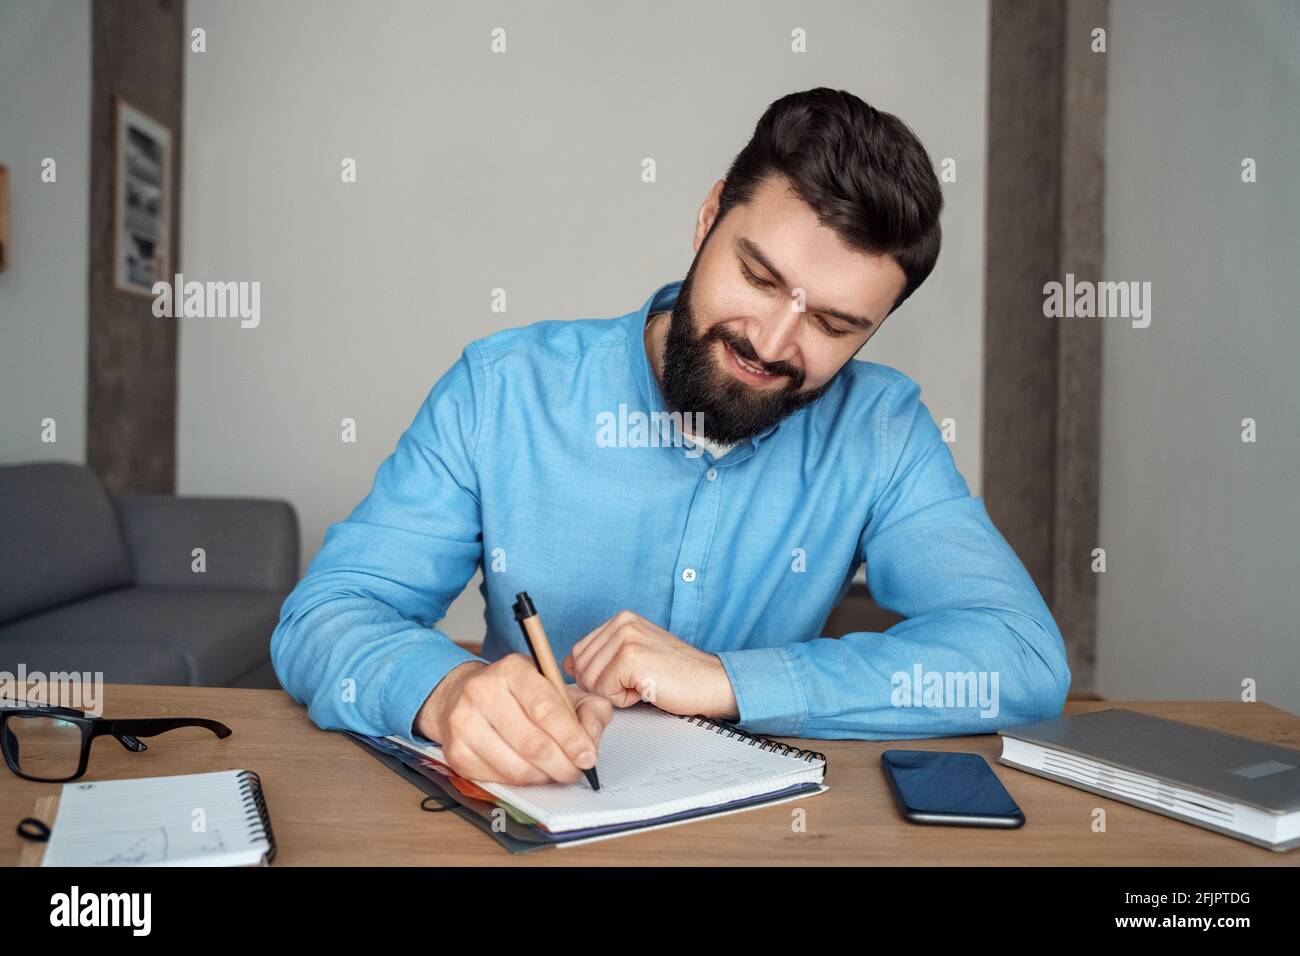 Smiling man student sitting at desk writing in notebook on online webinar lesson Stock Photo